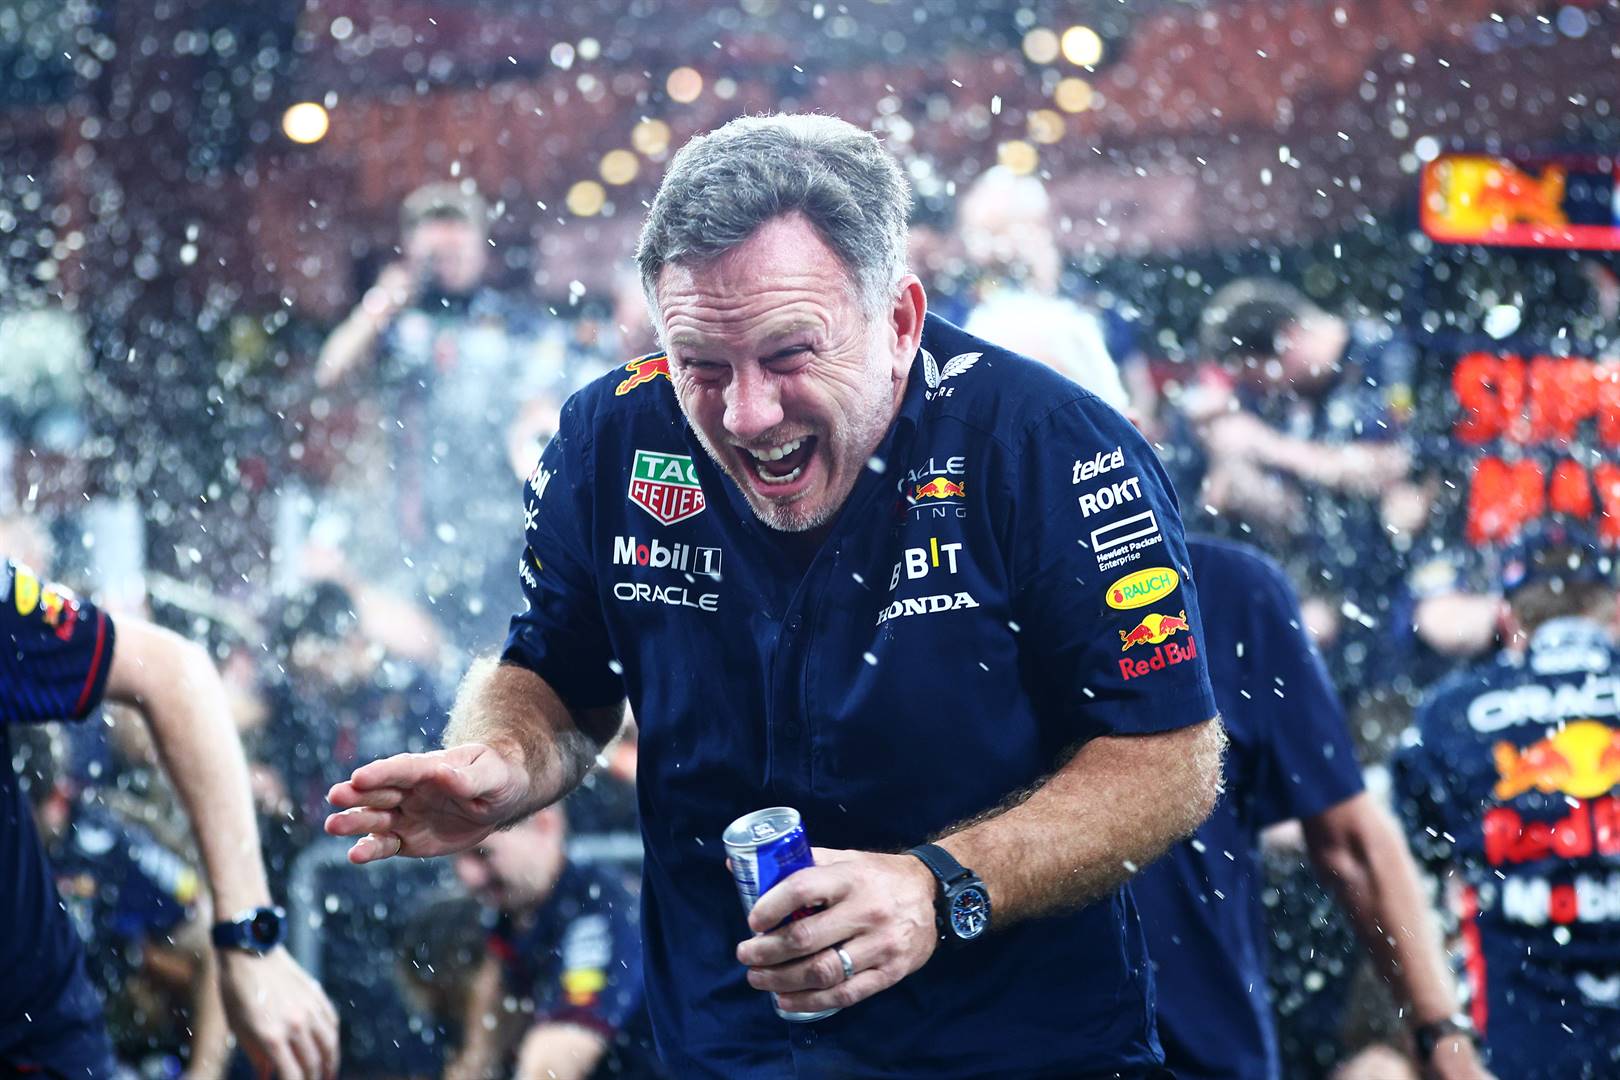 News24 | Red Bull's hearing into team boss Horner ends without decision